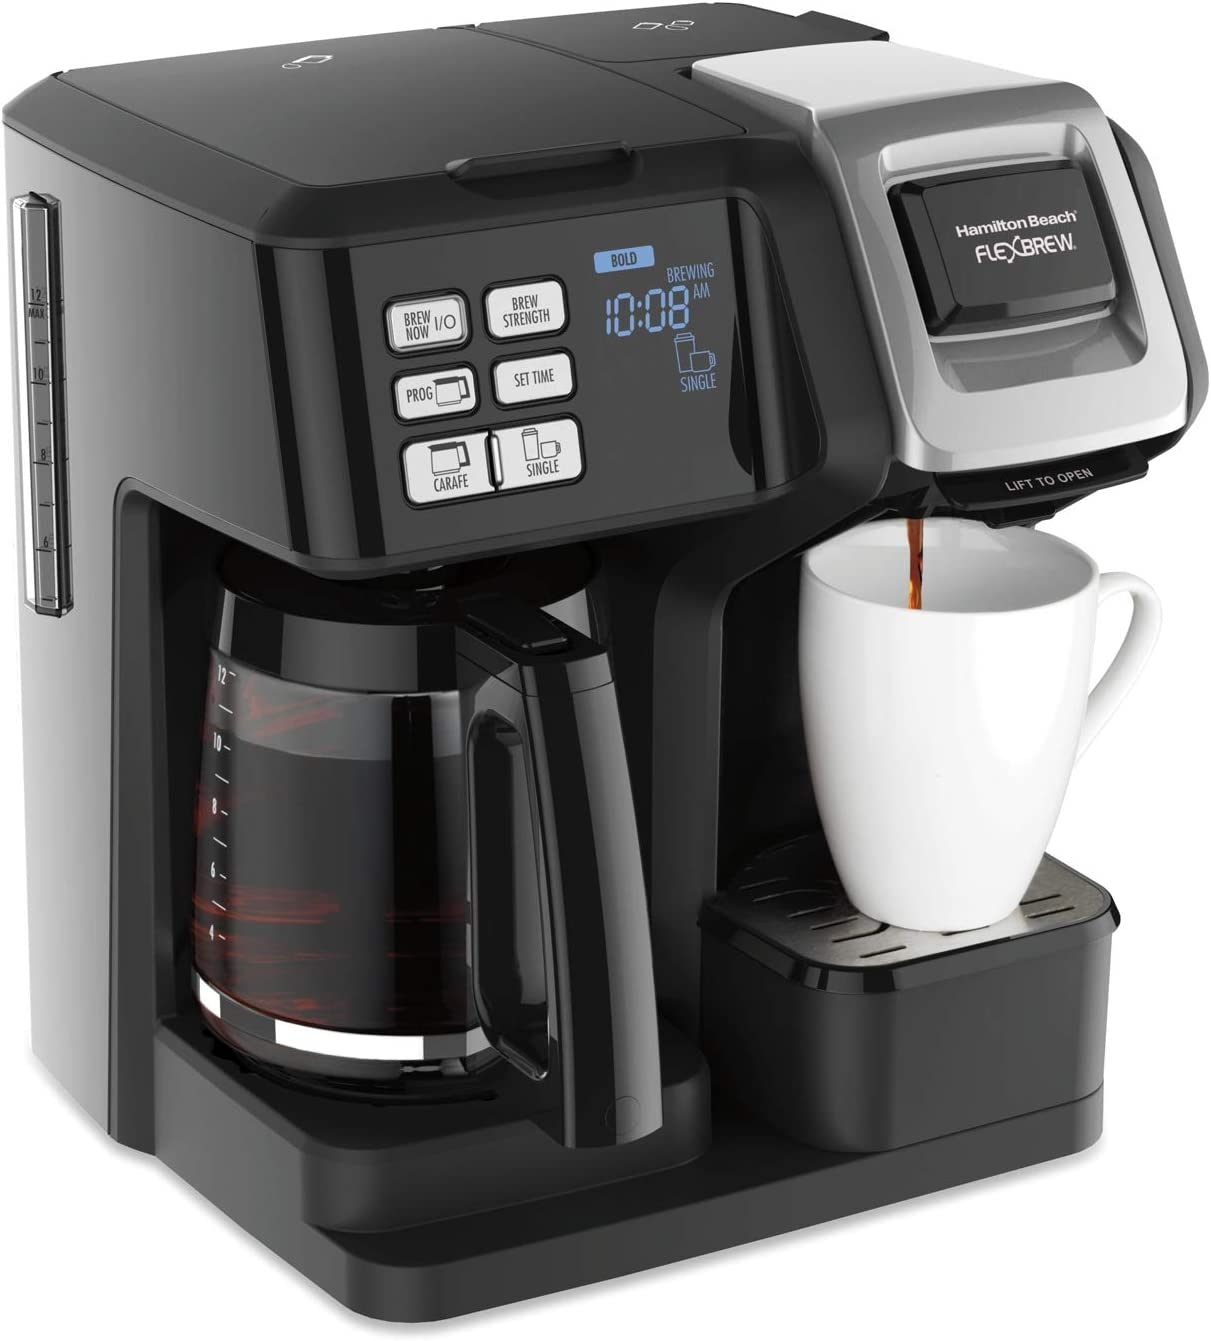 Hamilton Beach 49976 FlexBrew Trio 2-Way Coffee Maker, Compatible with K-Cup Pods or Grounds, Combo, Single Serve & Full 12c